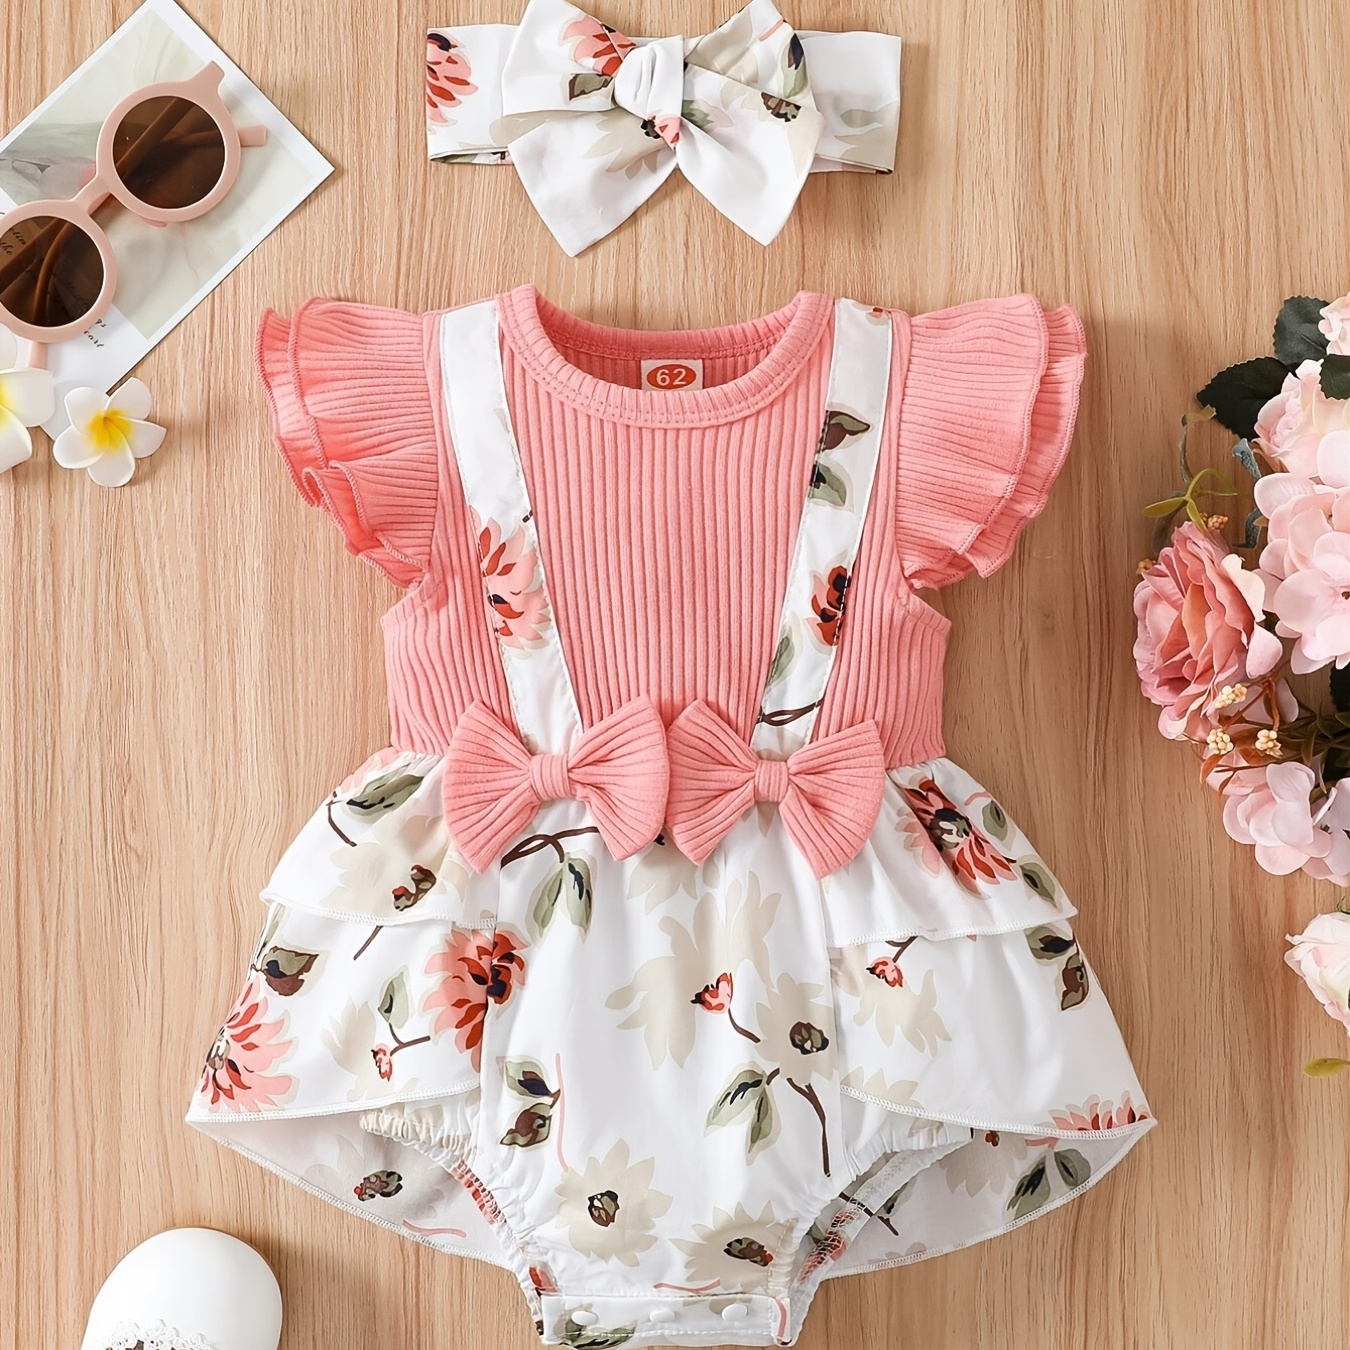 

Baby Girls Double Layer Flying Sleeve Pit Strip Splicing Small Fresh Flowers Strap Bowknot 2 Layer Skirt Swing Triangle Romper Bodysuit + Flower Headband Set For Spring And Summer